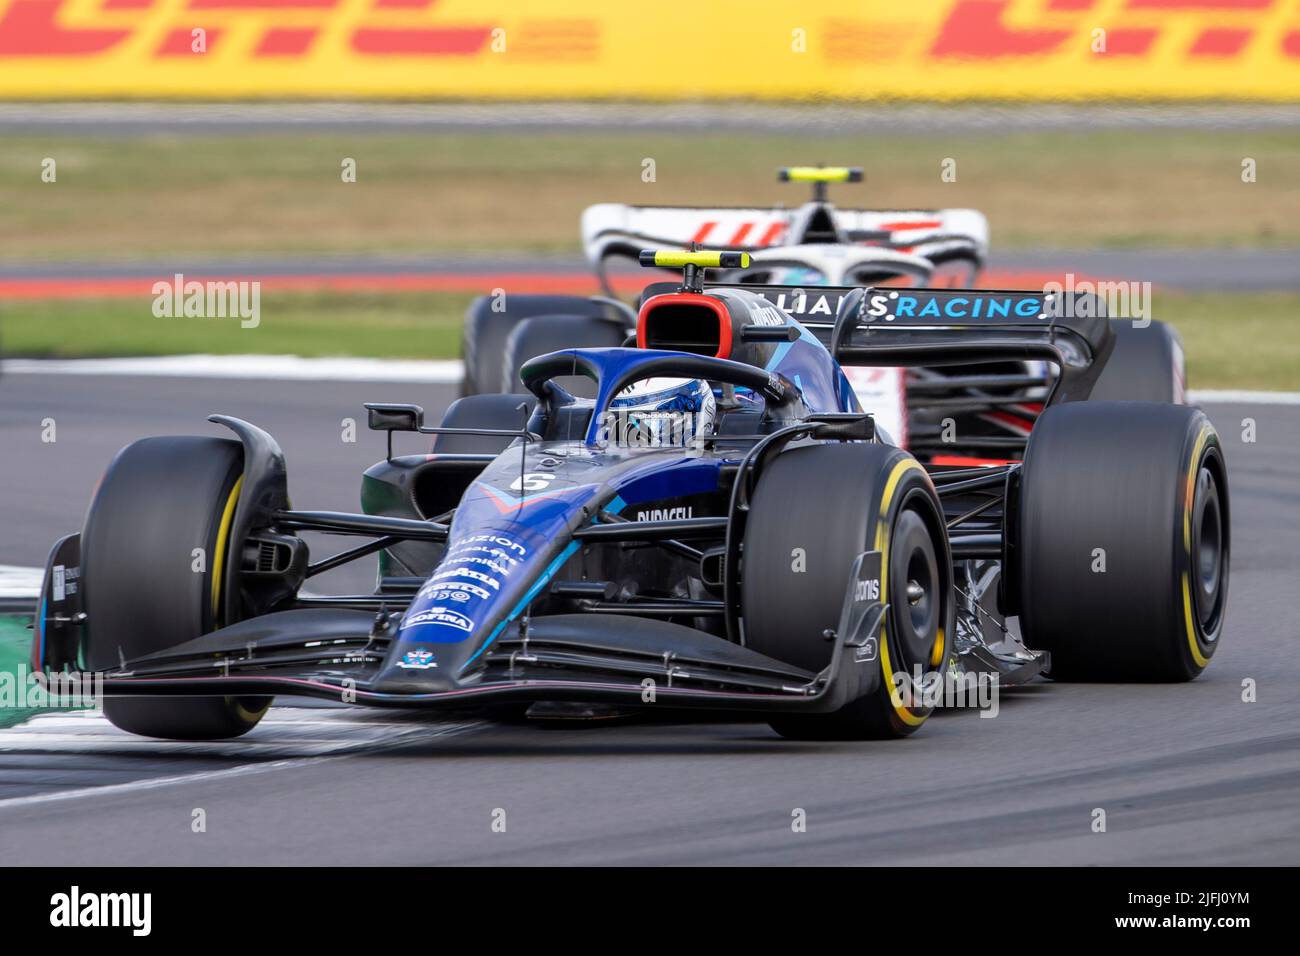 Silverstone, UK. 3rd July 2022, Silverstone Circuit, Silverstone, Northamptonshire, England: British F1 Grand Prix, Race day: Williams Racing driver Nicholas Latifi in his Williams-Mercedes FW44 ahead of Haas F1 Team driver Kevin Magnussen in his Haas-Ferrari VF-22 Credit: Action Plus Sports Images/Alamy Live News Stock Photo